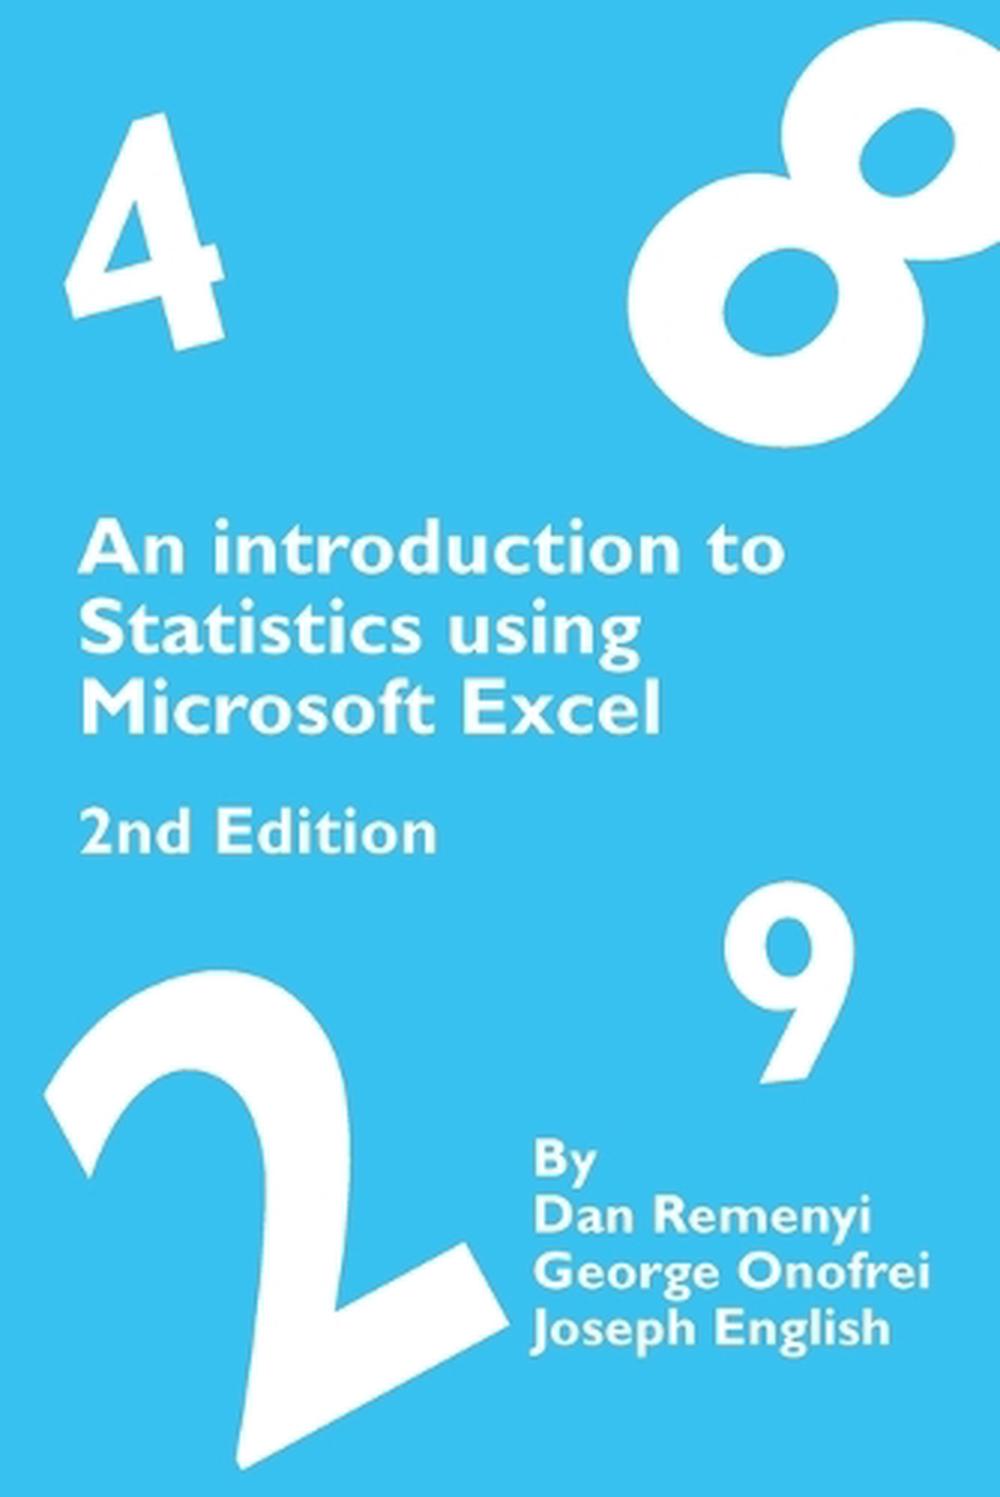 An Introduction to Statistics using Microsoft Excel 2nd Edition by Dan